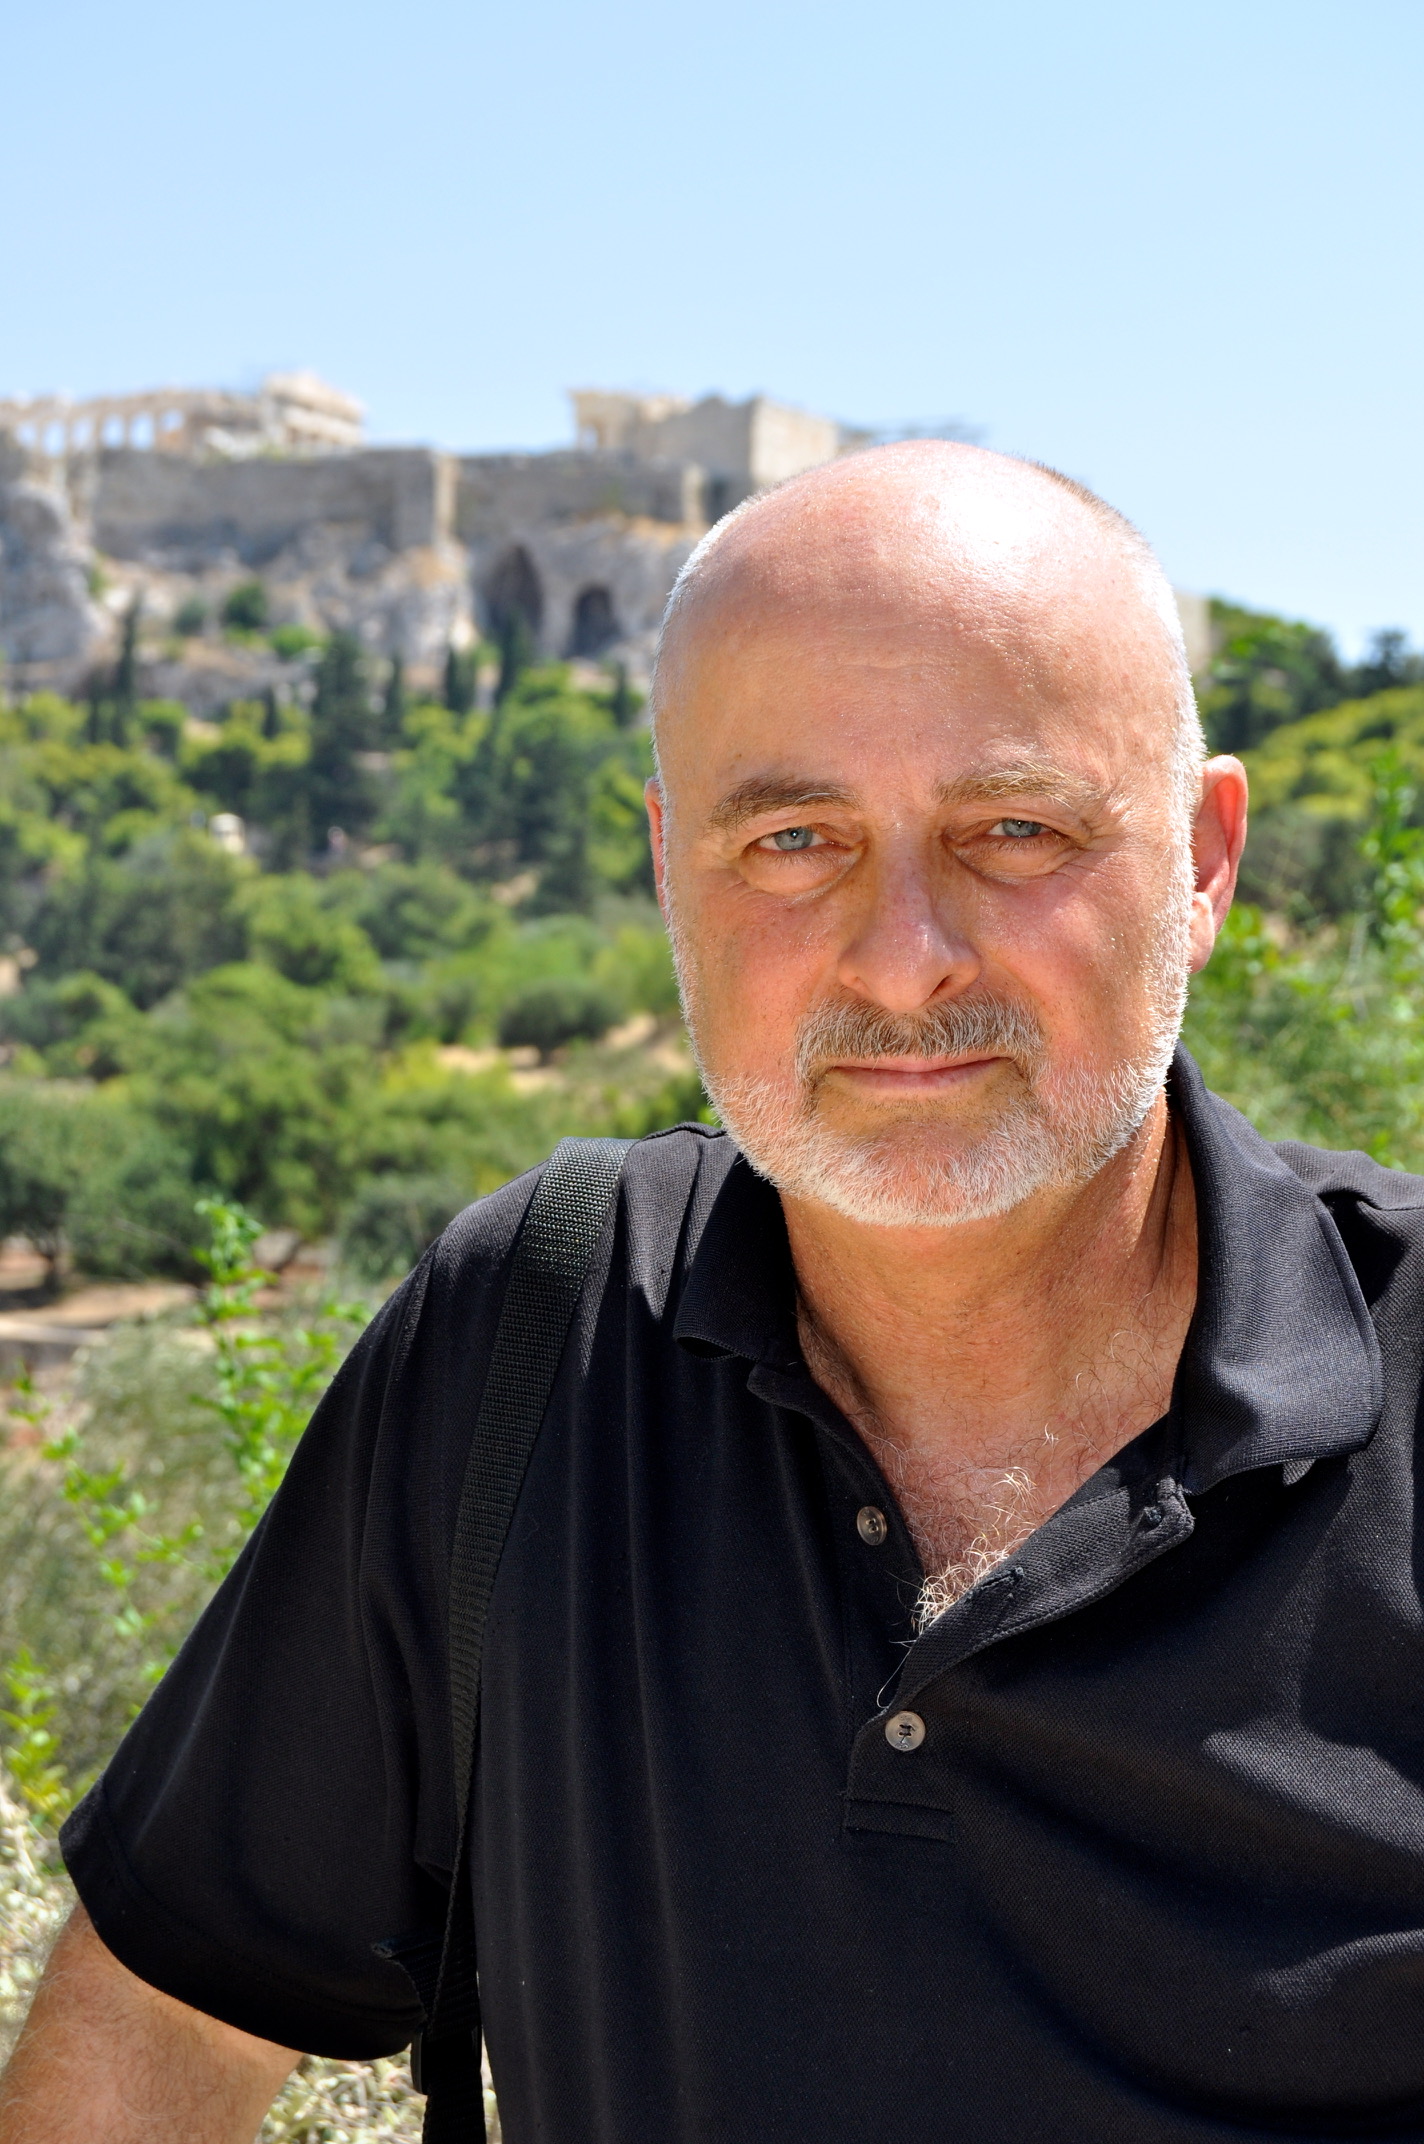 Three time Science Fiction Hugo Award Winner David Brin, Author of "The Postman" and "Existence"